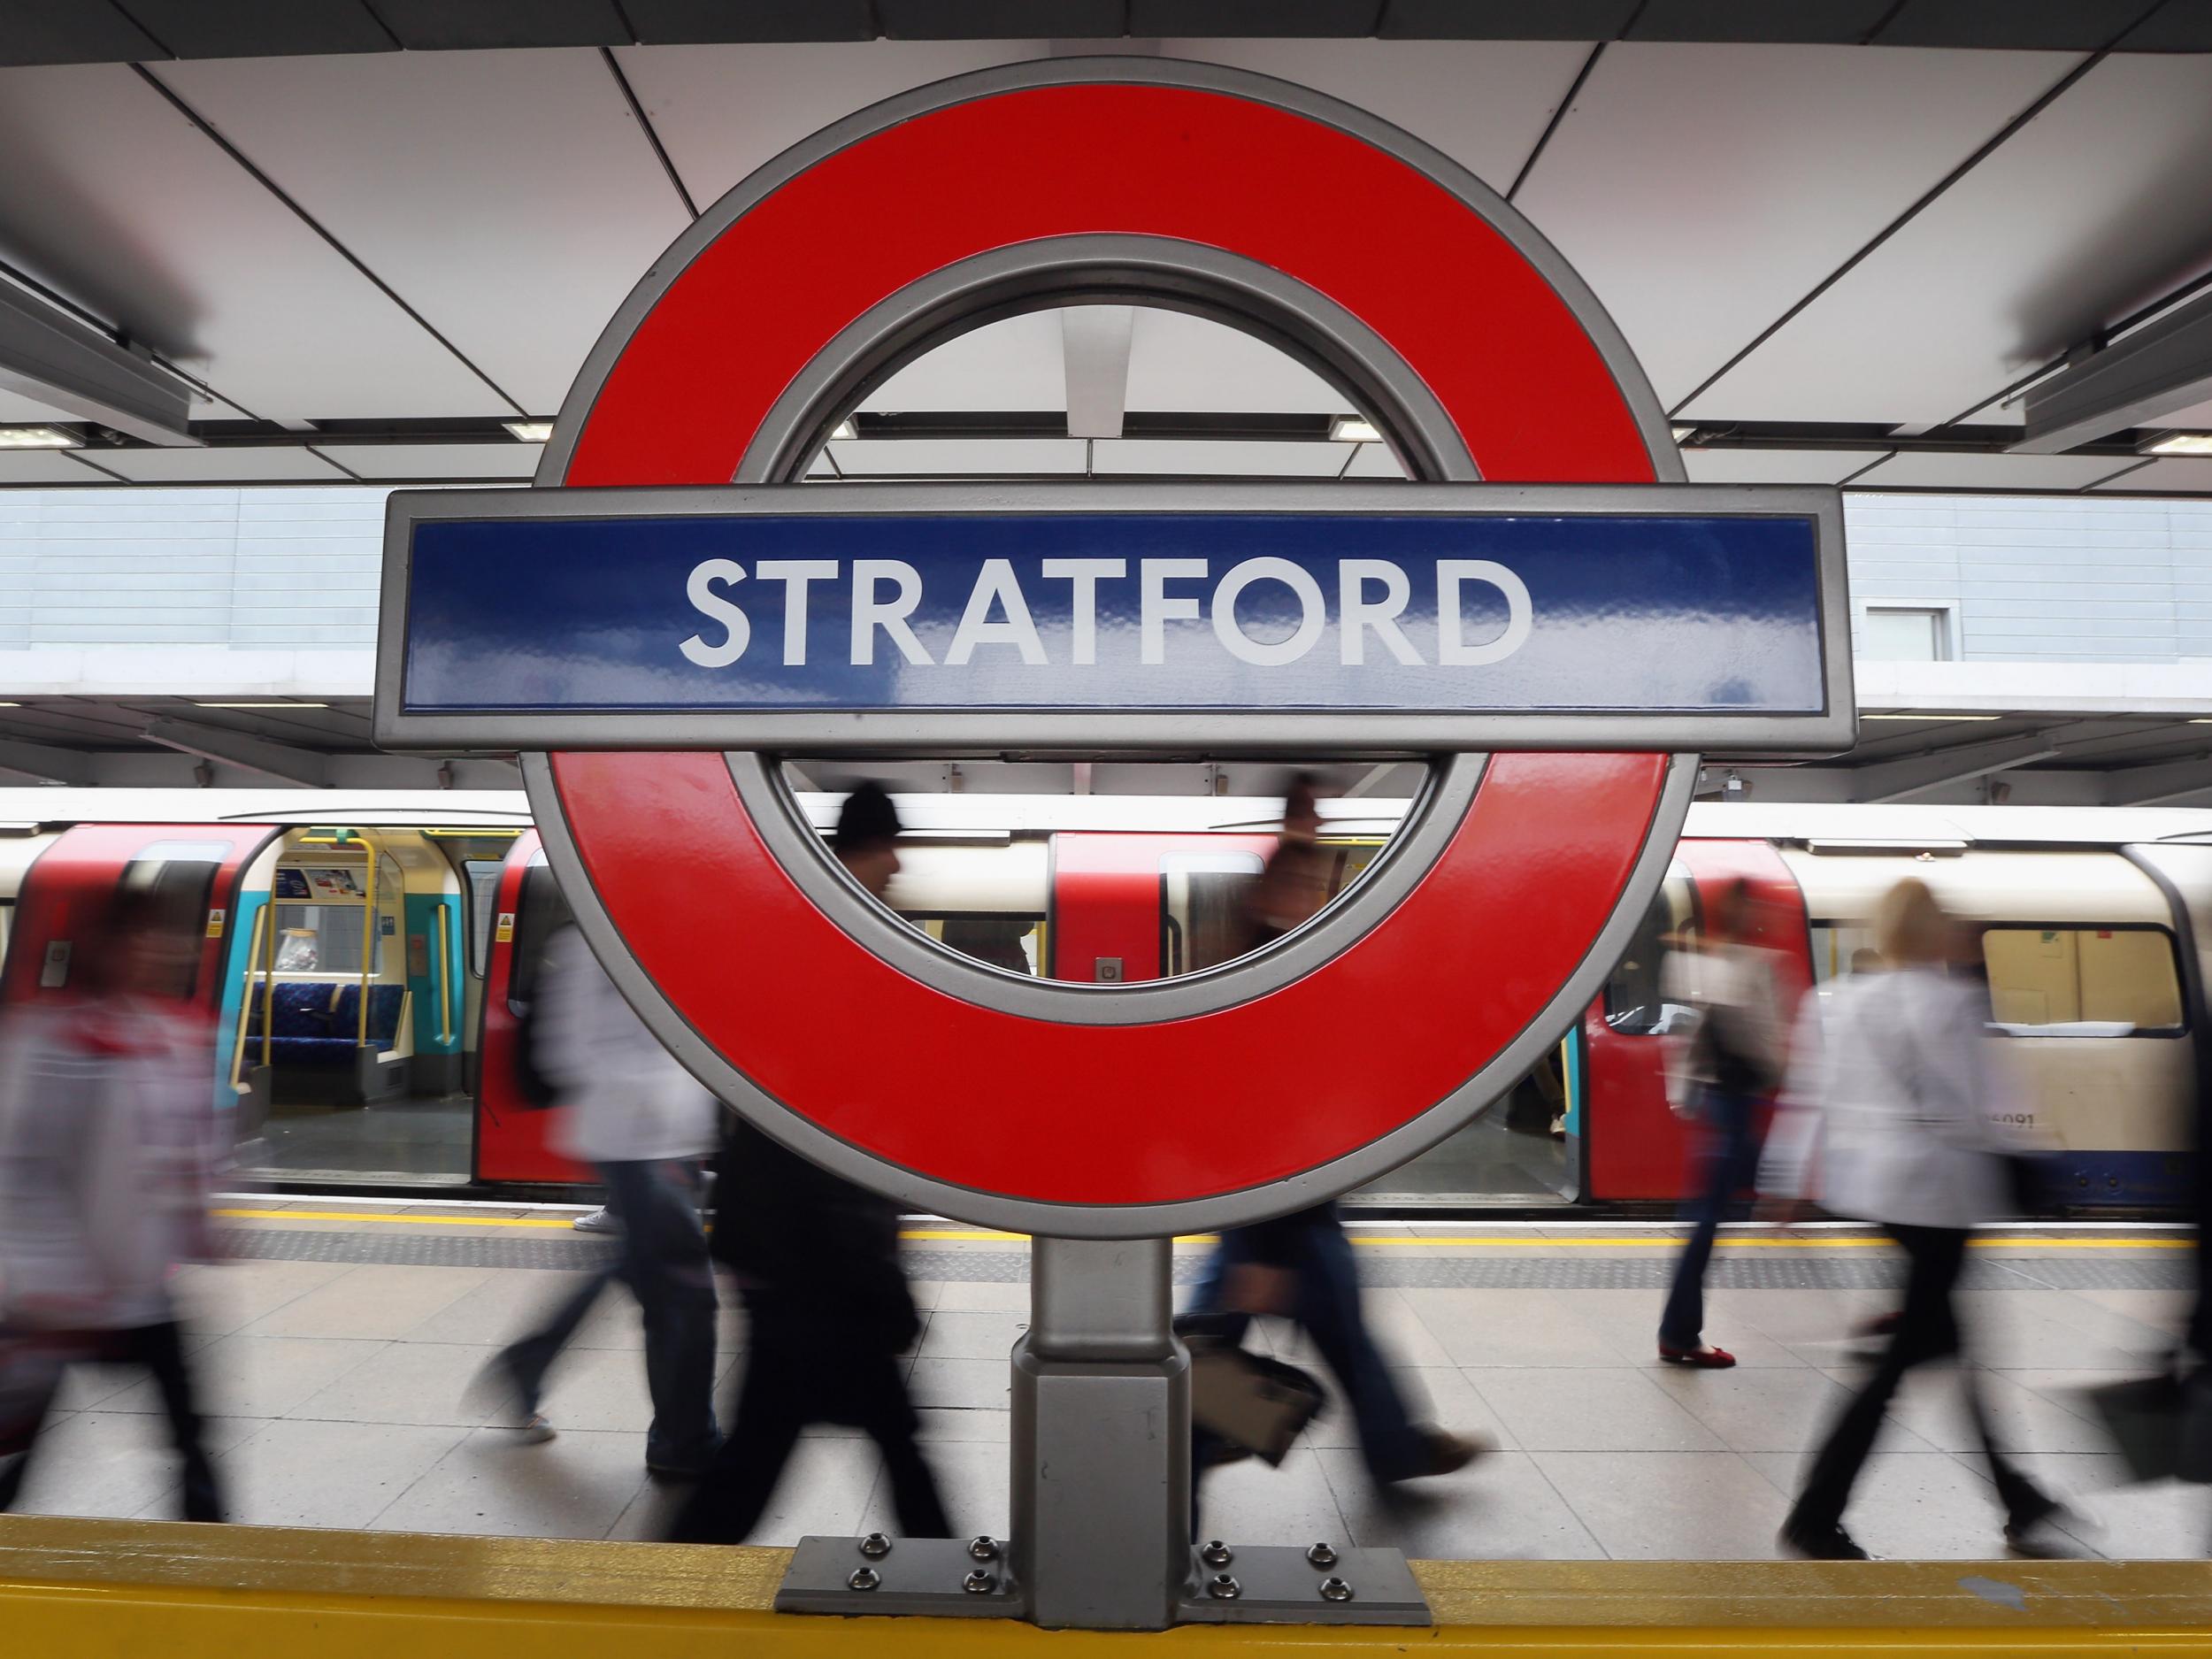 The station is near Westfield shopping centre and is part of a busy transport hub